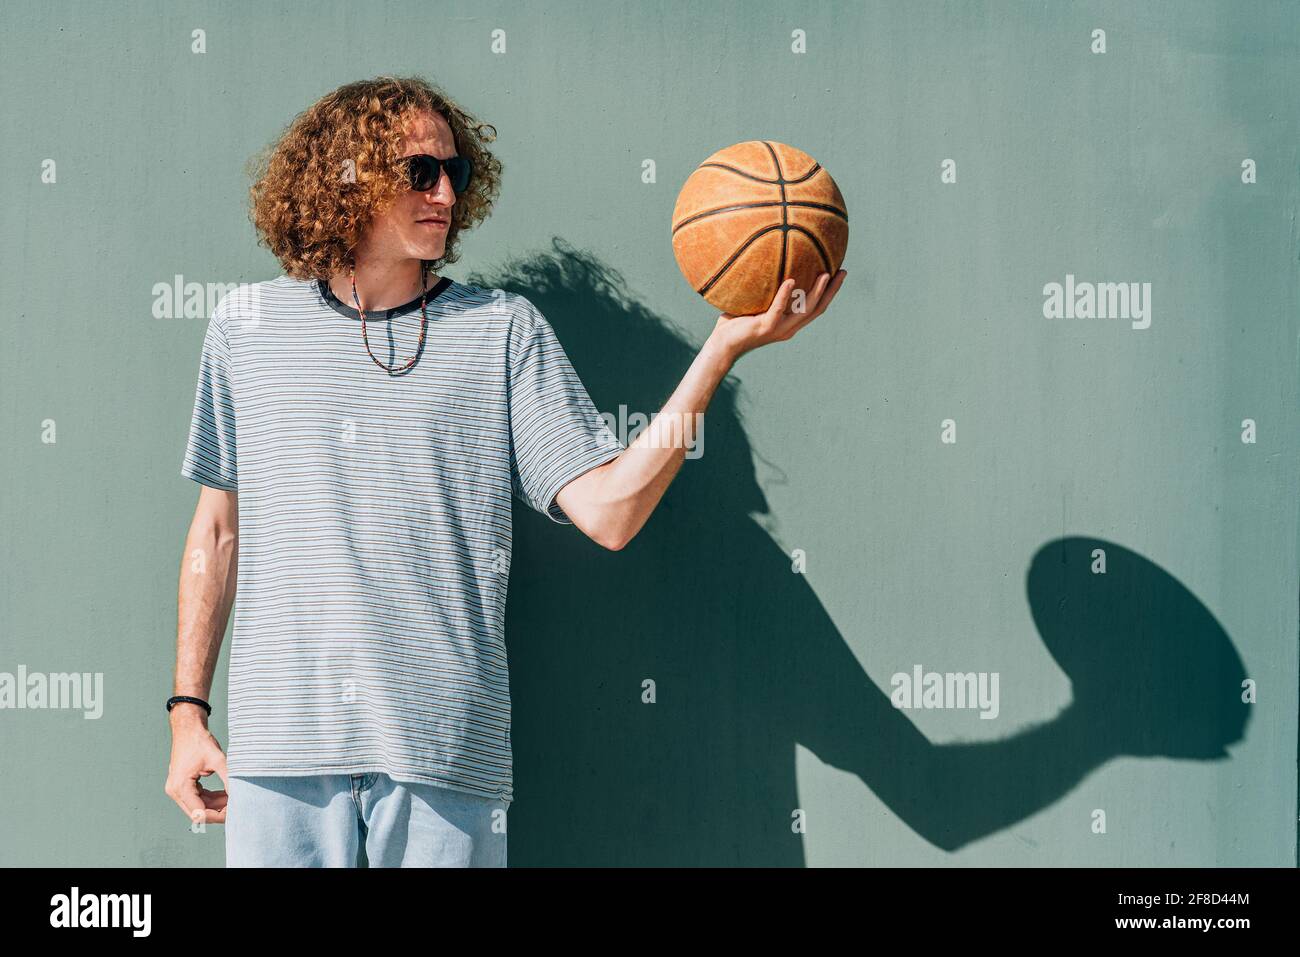 attractive young man looking to the basketball ball he holds with one hand. He dresses casual and wears sunglasses Stock Photo